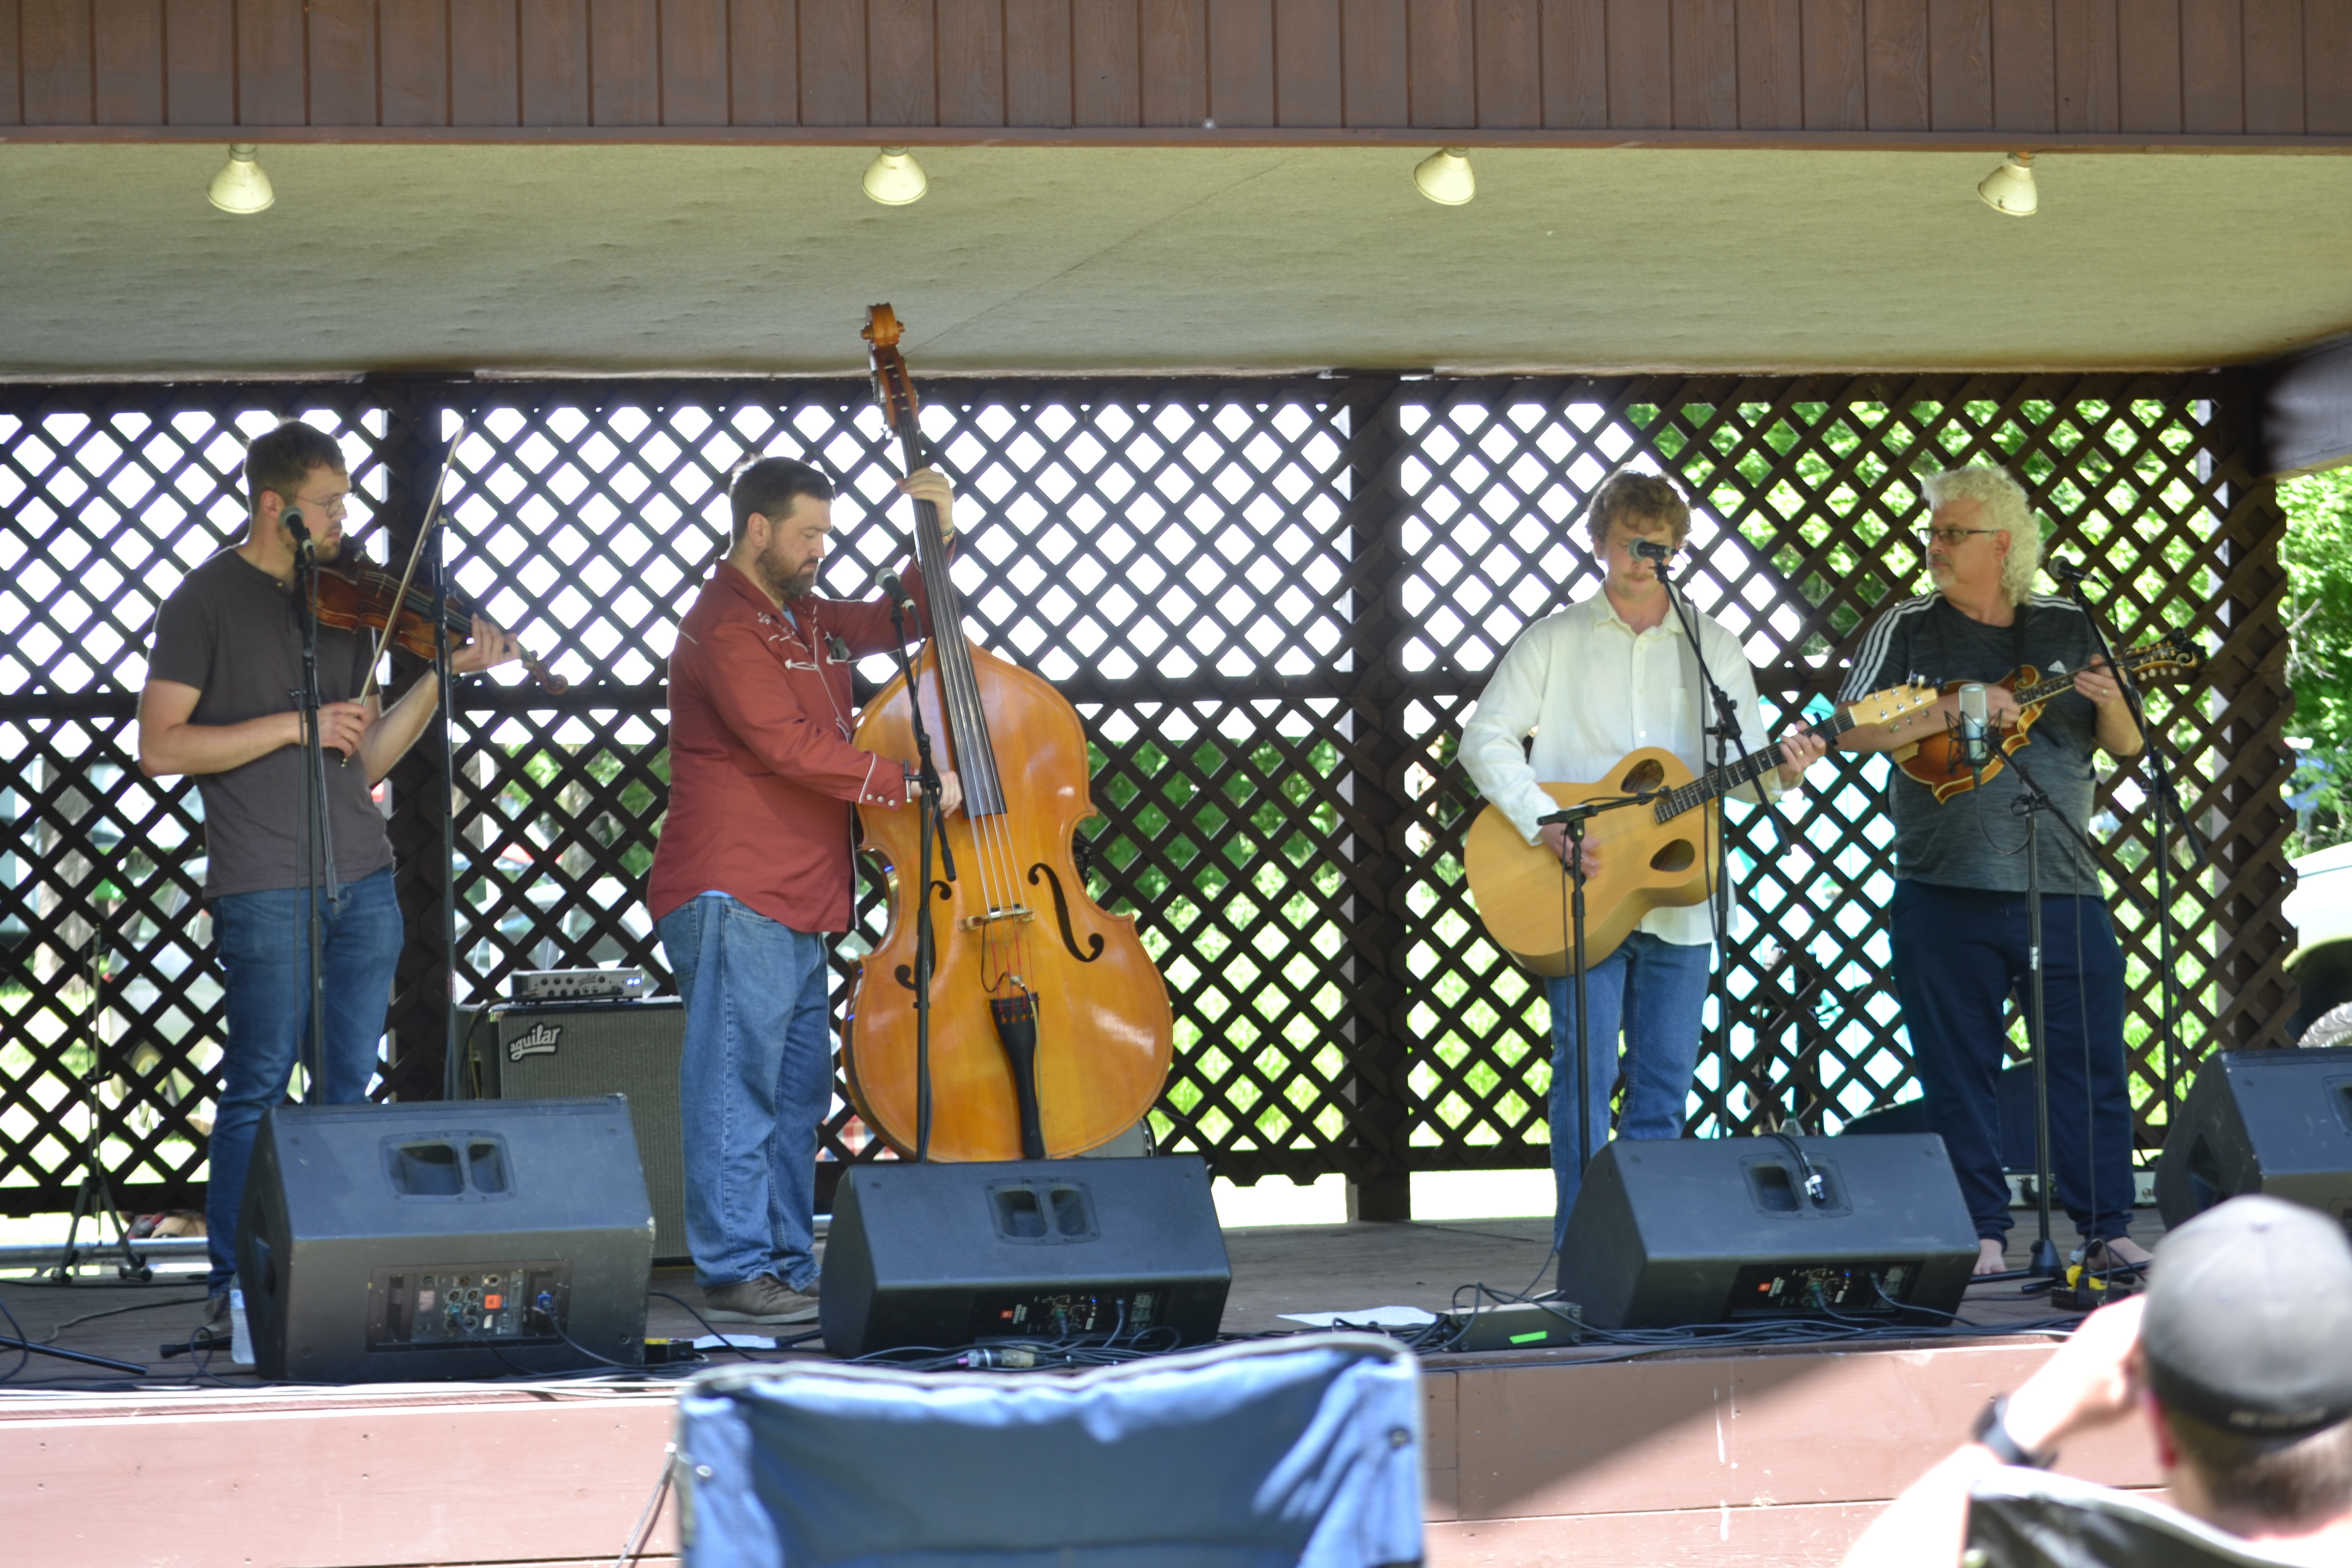 The 32nd Annual Bluegrass Festival